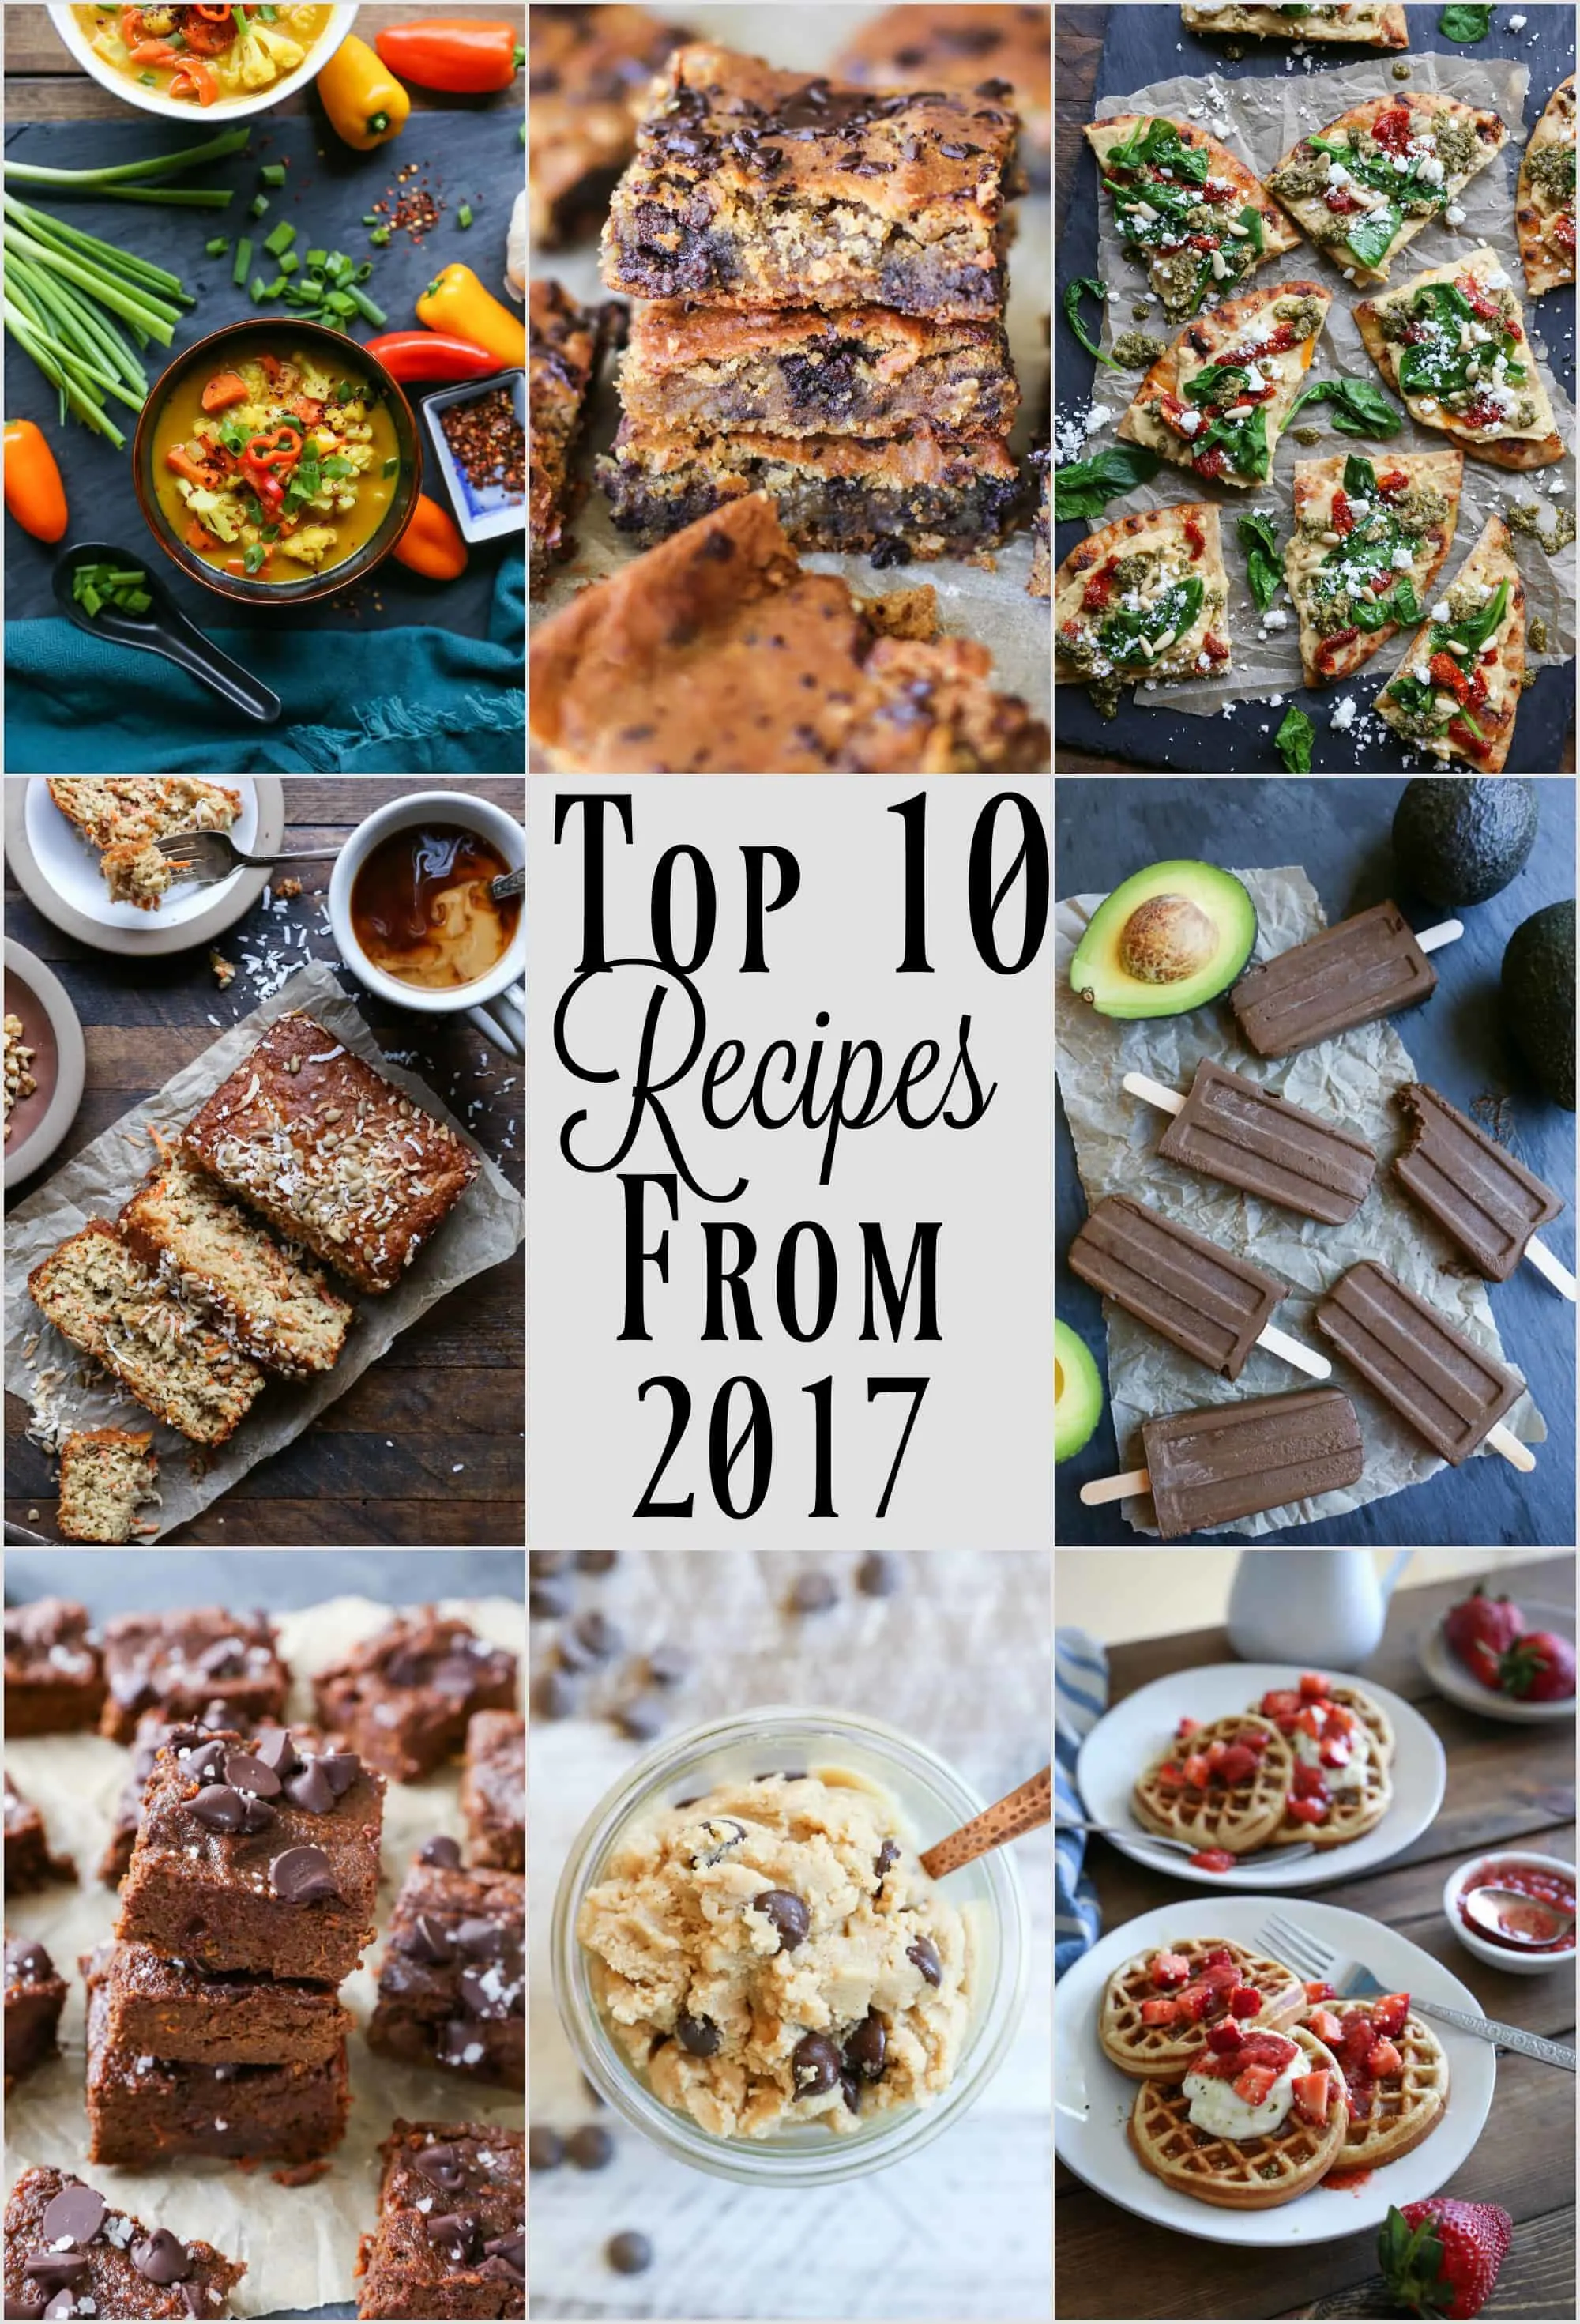 Top 10 Recipes from 2017 as seen on TheRoastedRoot.net #TheRoastedRoot